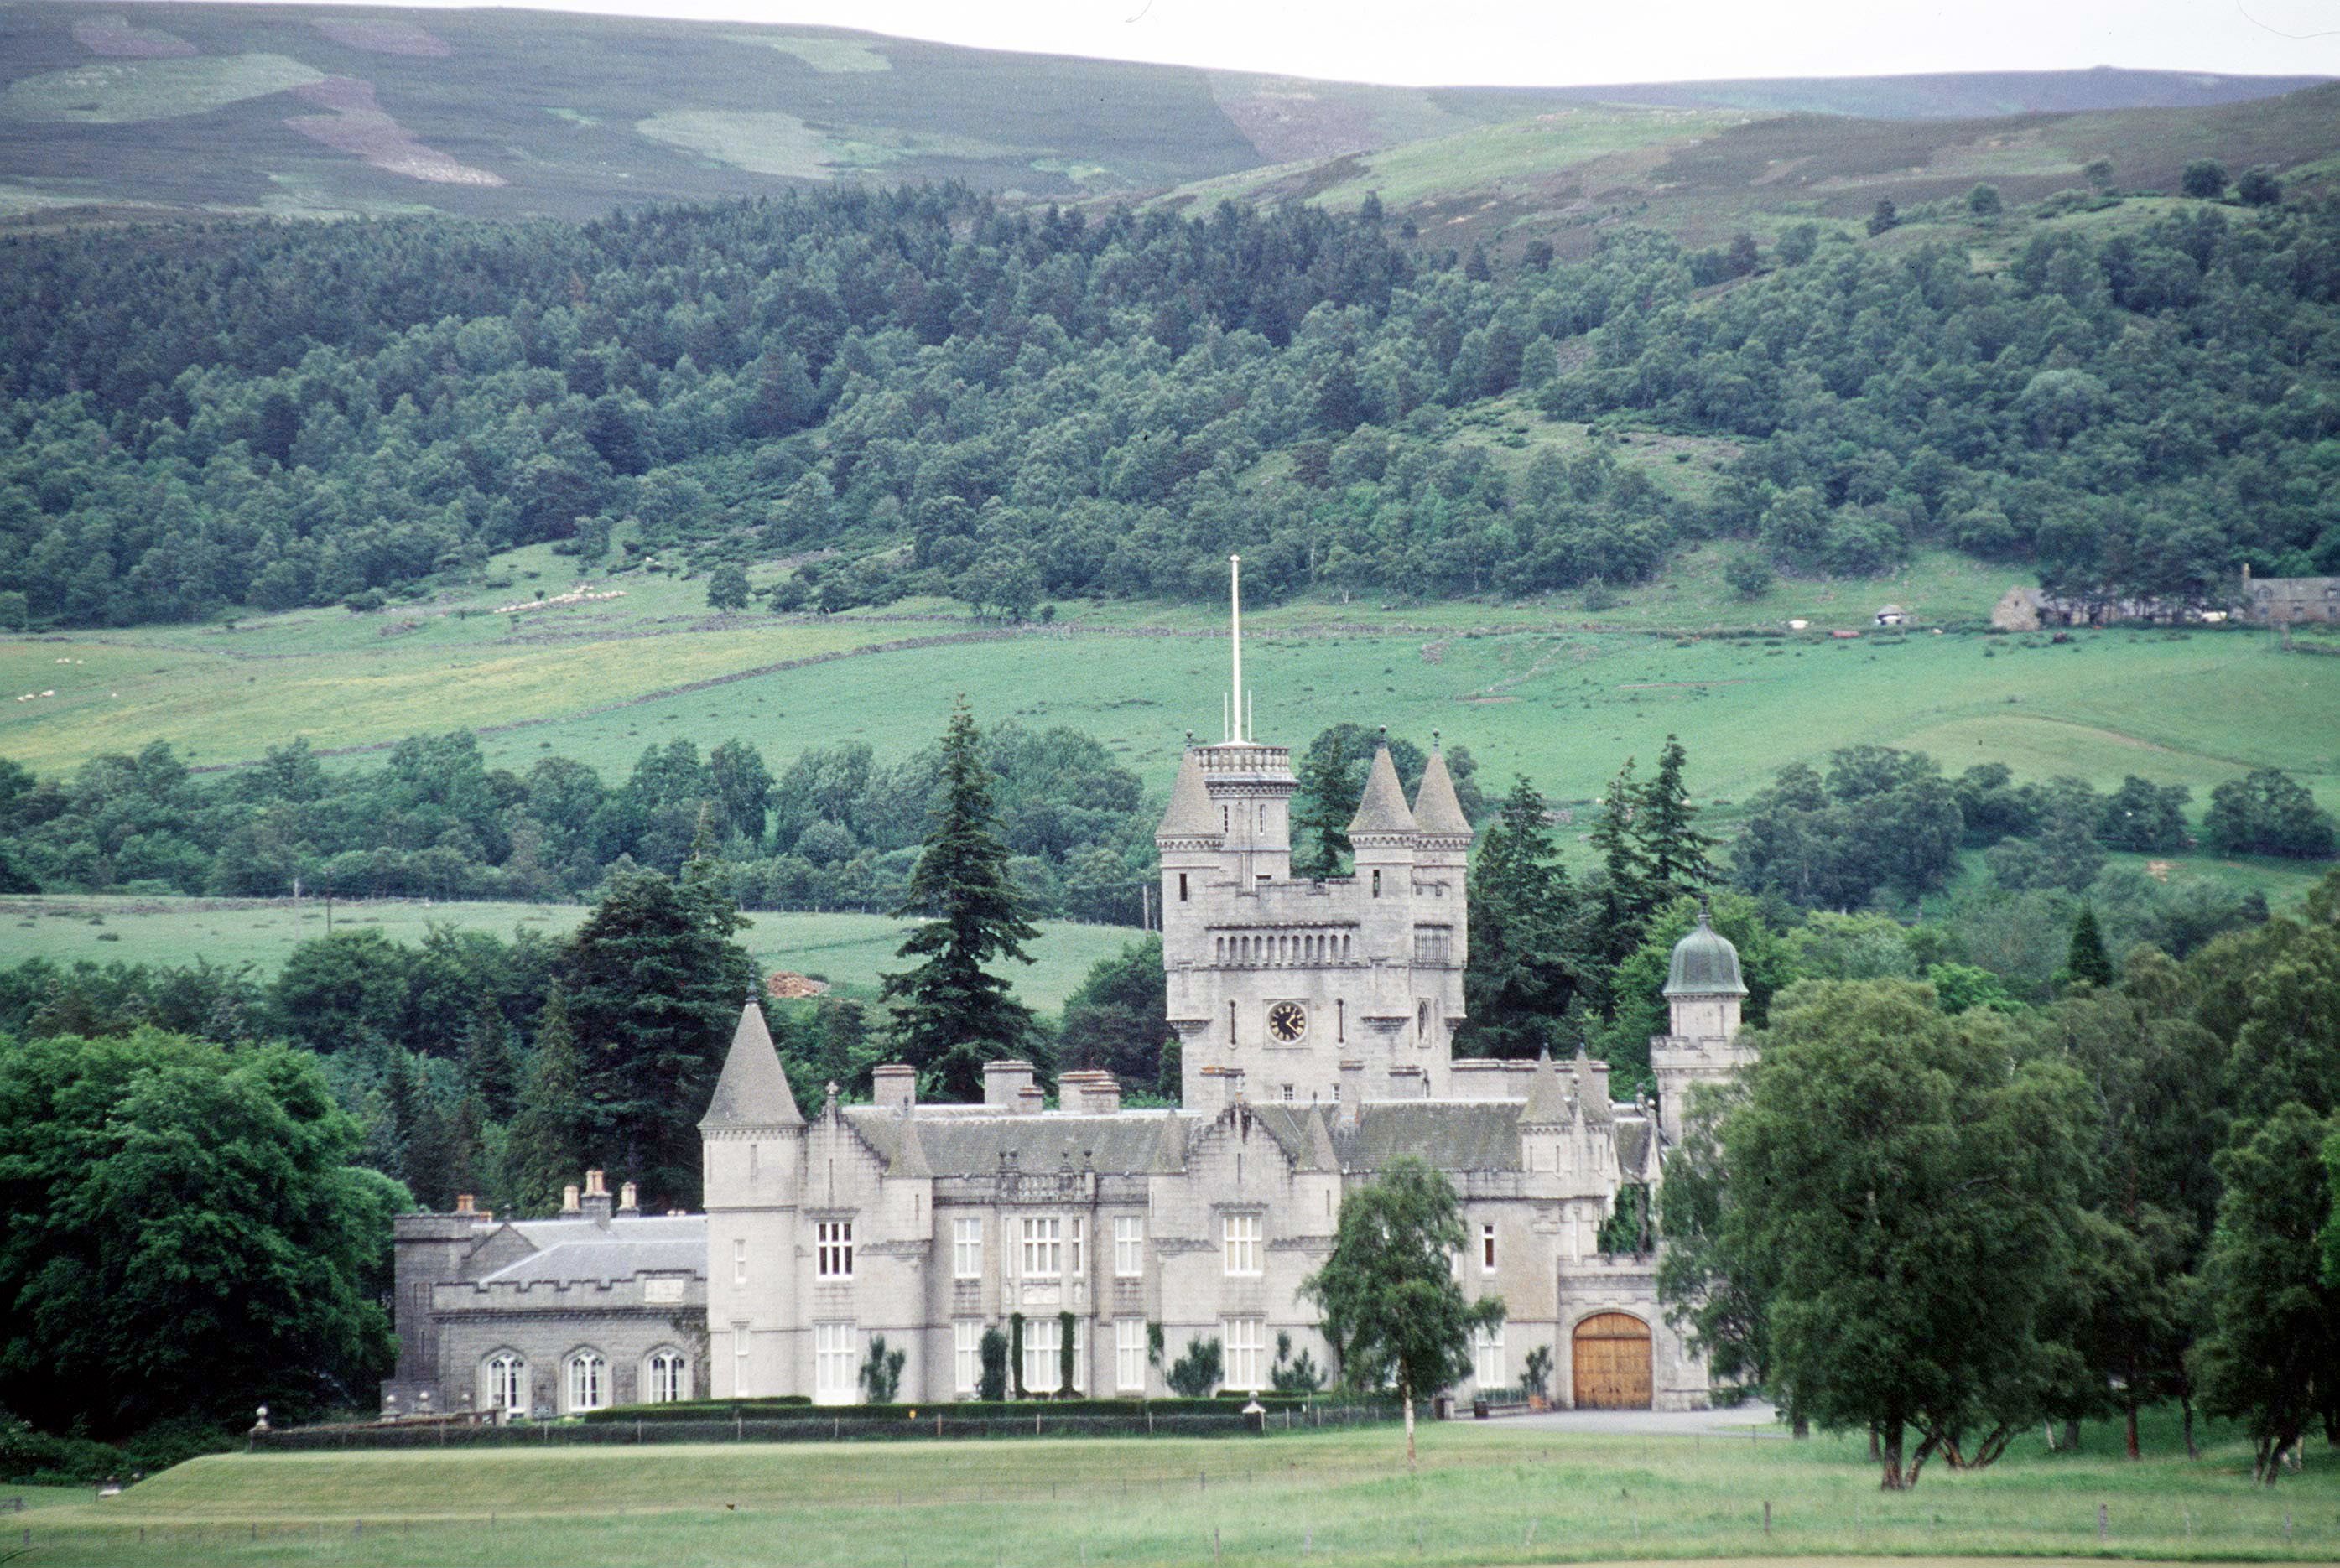 Balmoral Castle and grounds